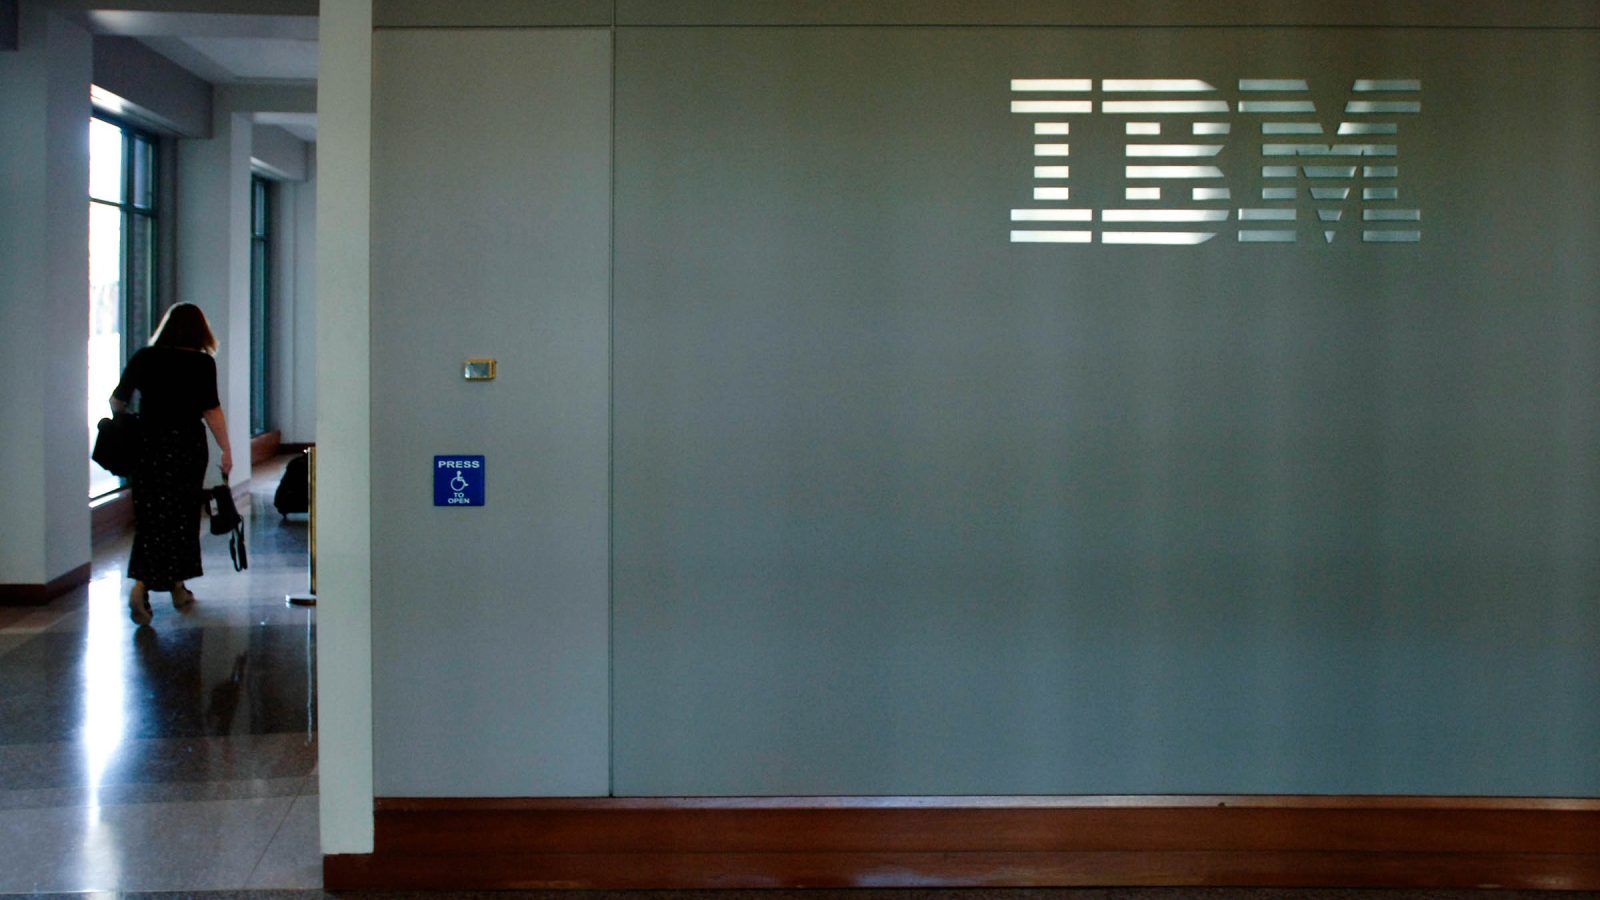 When IBM posted an ad for a remote job in Brazil last September, it included a caveat: “IBM, for institutional reasons, will not hire residents of M